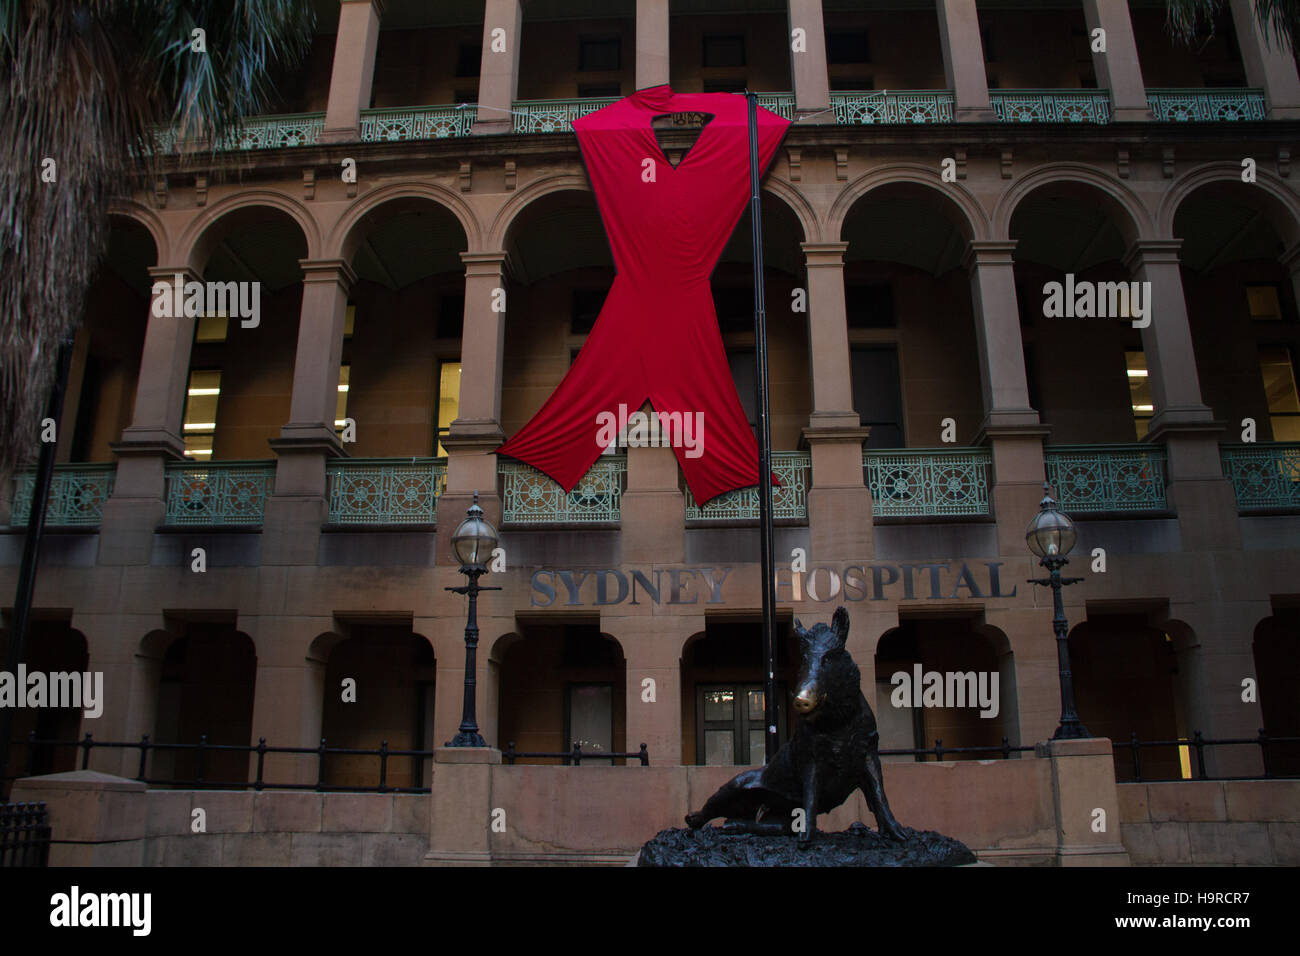 Sydney, Australia. 25 November 2016. A giant red ribbon can be seen on the Sydney Hospital building on Macquarie Street ahead of World AIDS Day on 1 December each year. World AIDS Day raises awareness around the world about the issues surrounding HIV and AIDS. It is a day for people to show their support for people living with HIV and to commemorate people who have died. Credit: Credit:  2016 Richard Milnes/Alamy Live News. Stock Photo